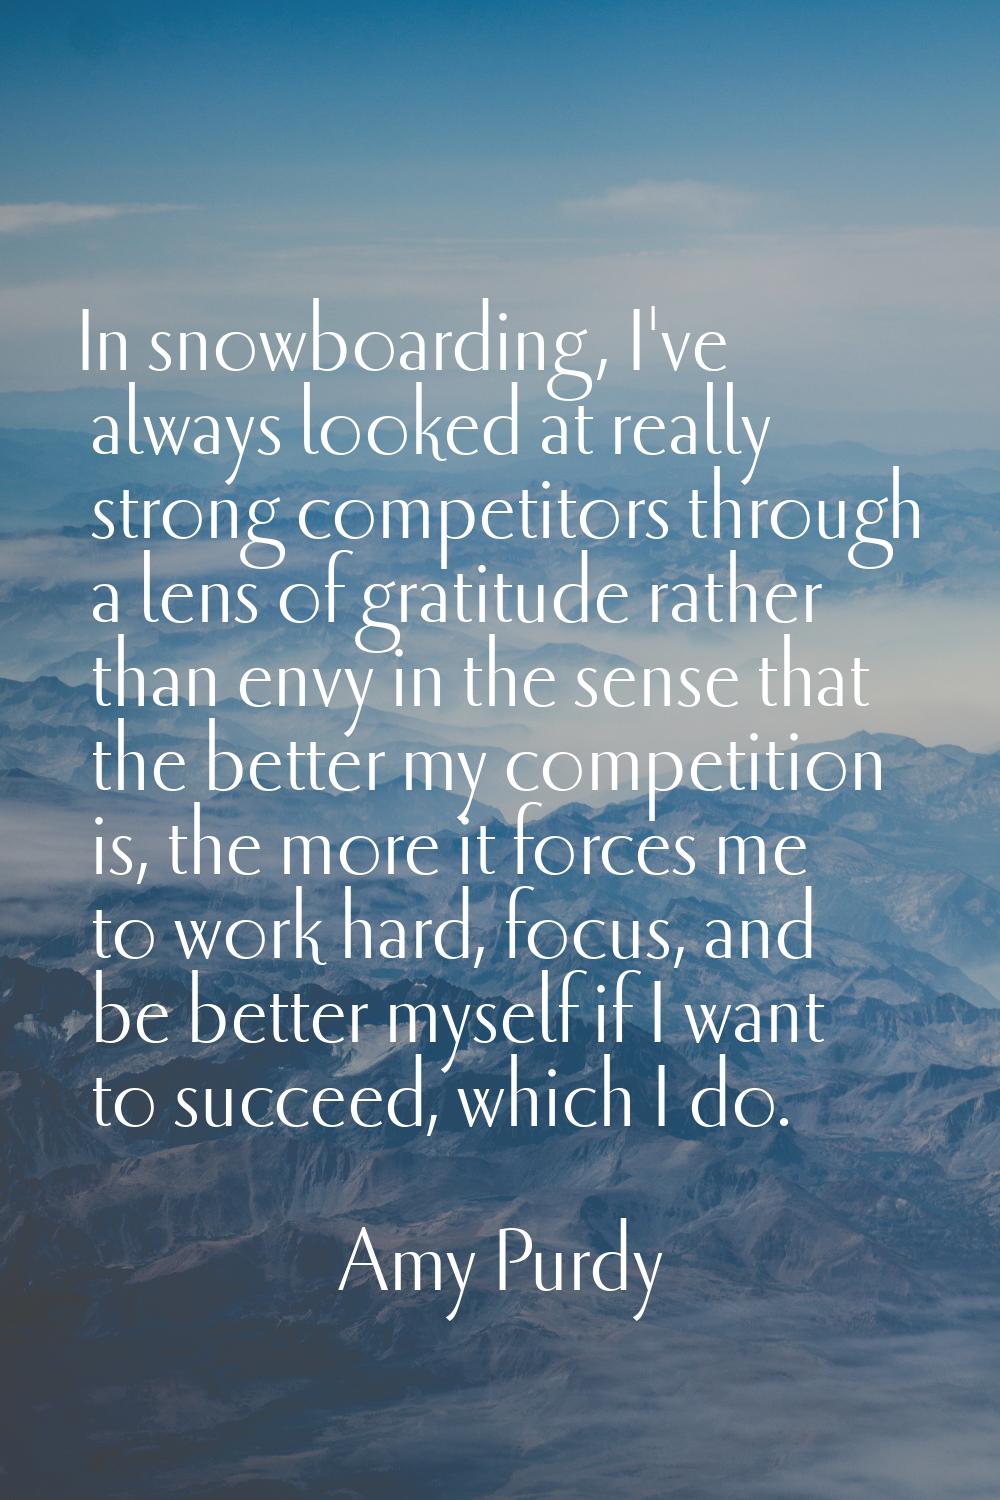 In snowboarding, I've always looked at really strong competitors through a lens of gratitude rather